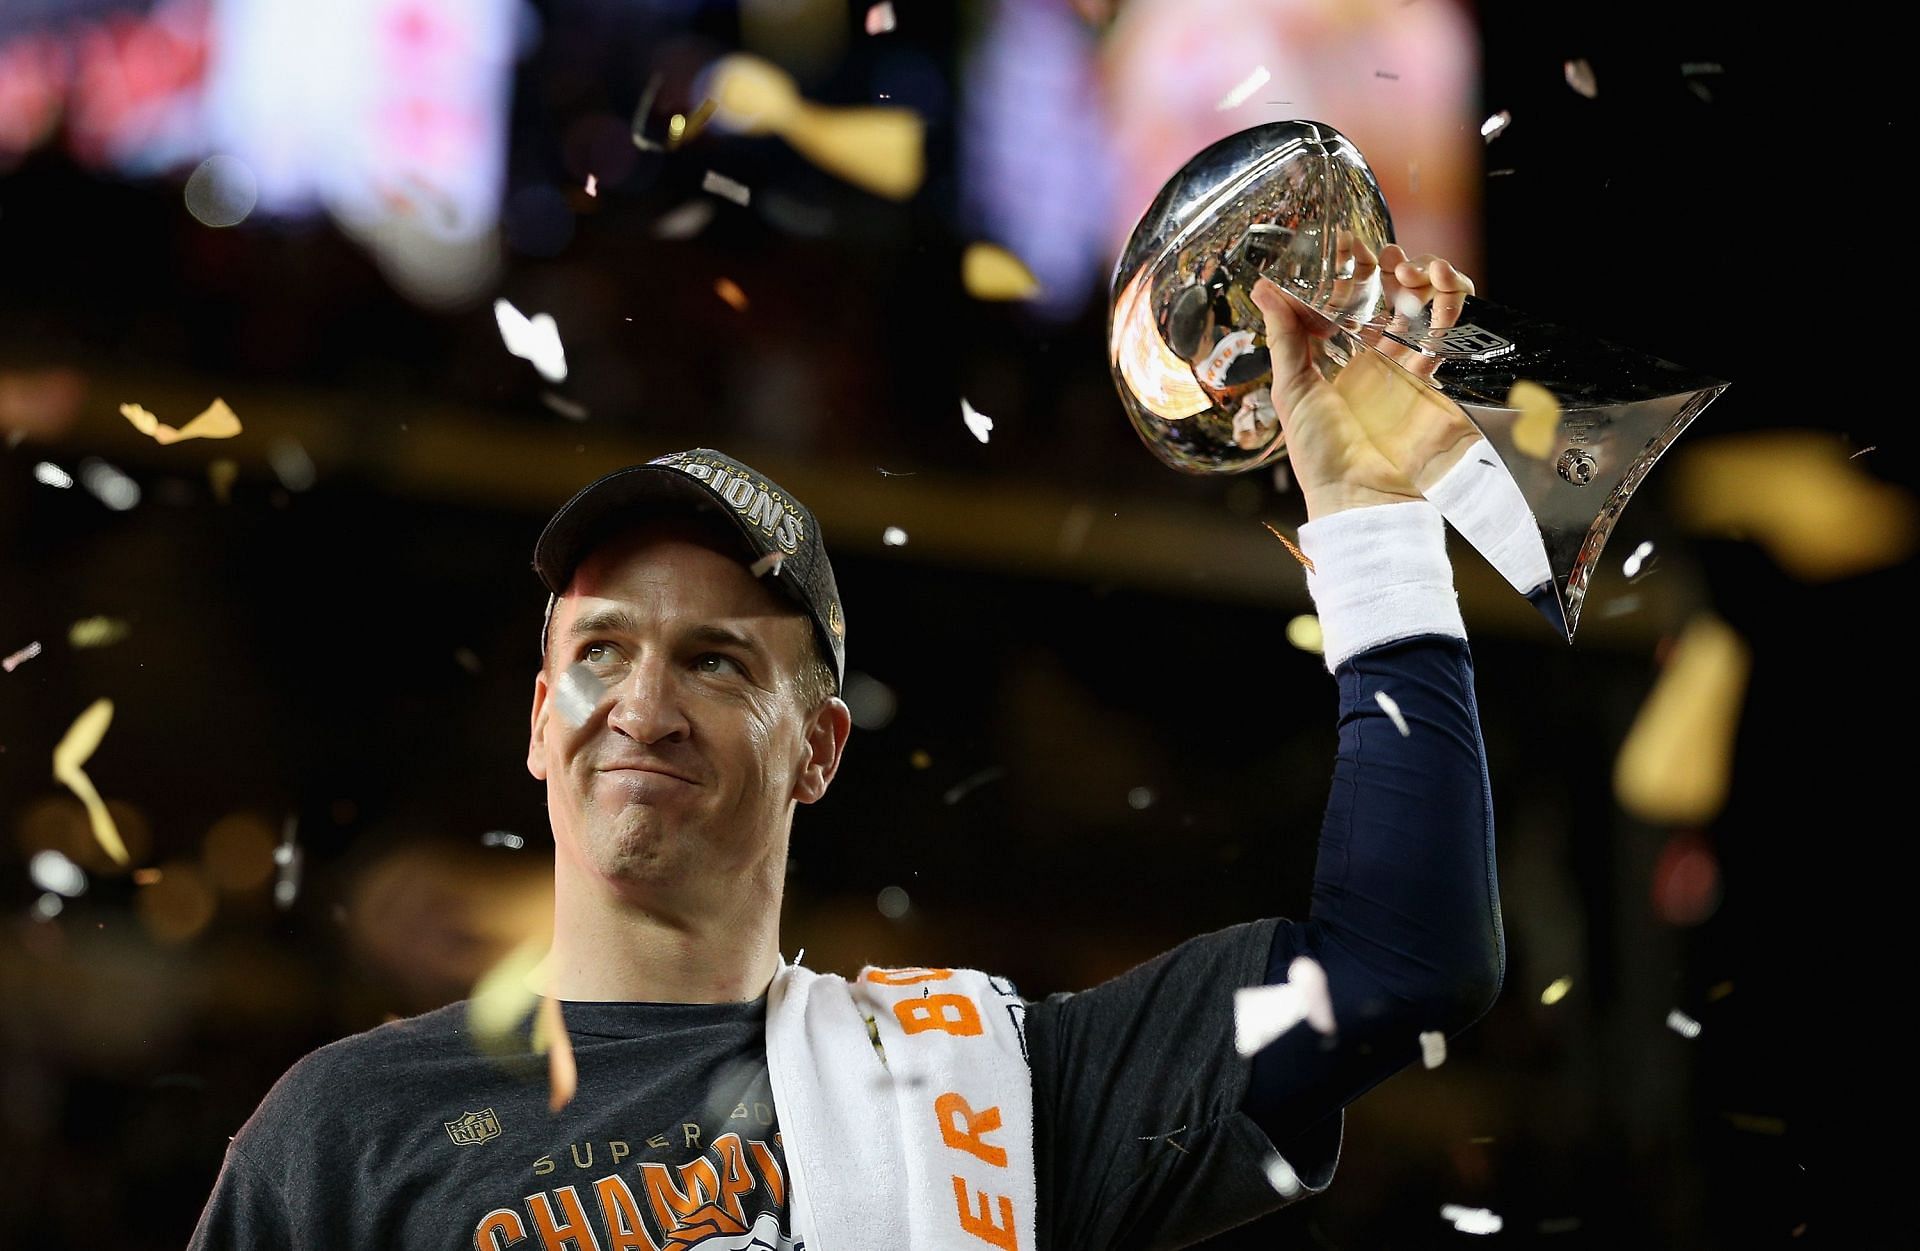 Peyton Manning lifting the Vince Lombardi trophy